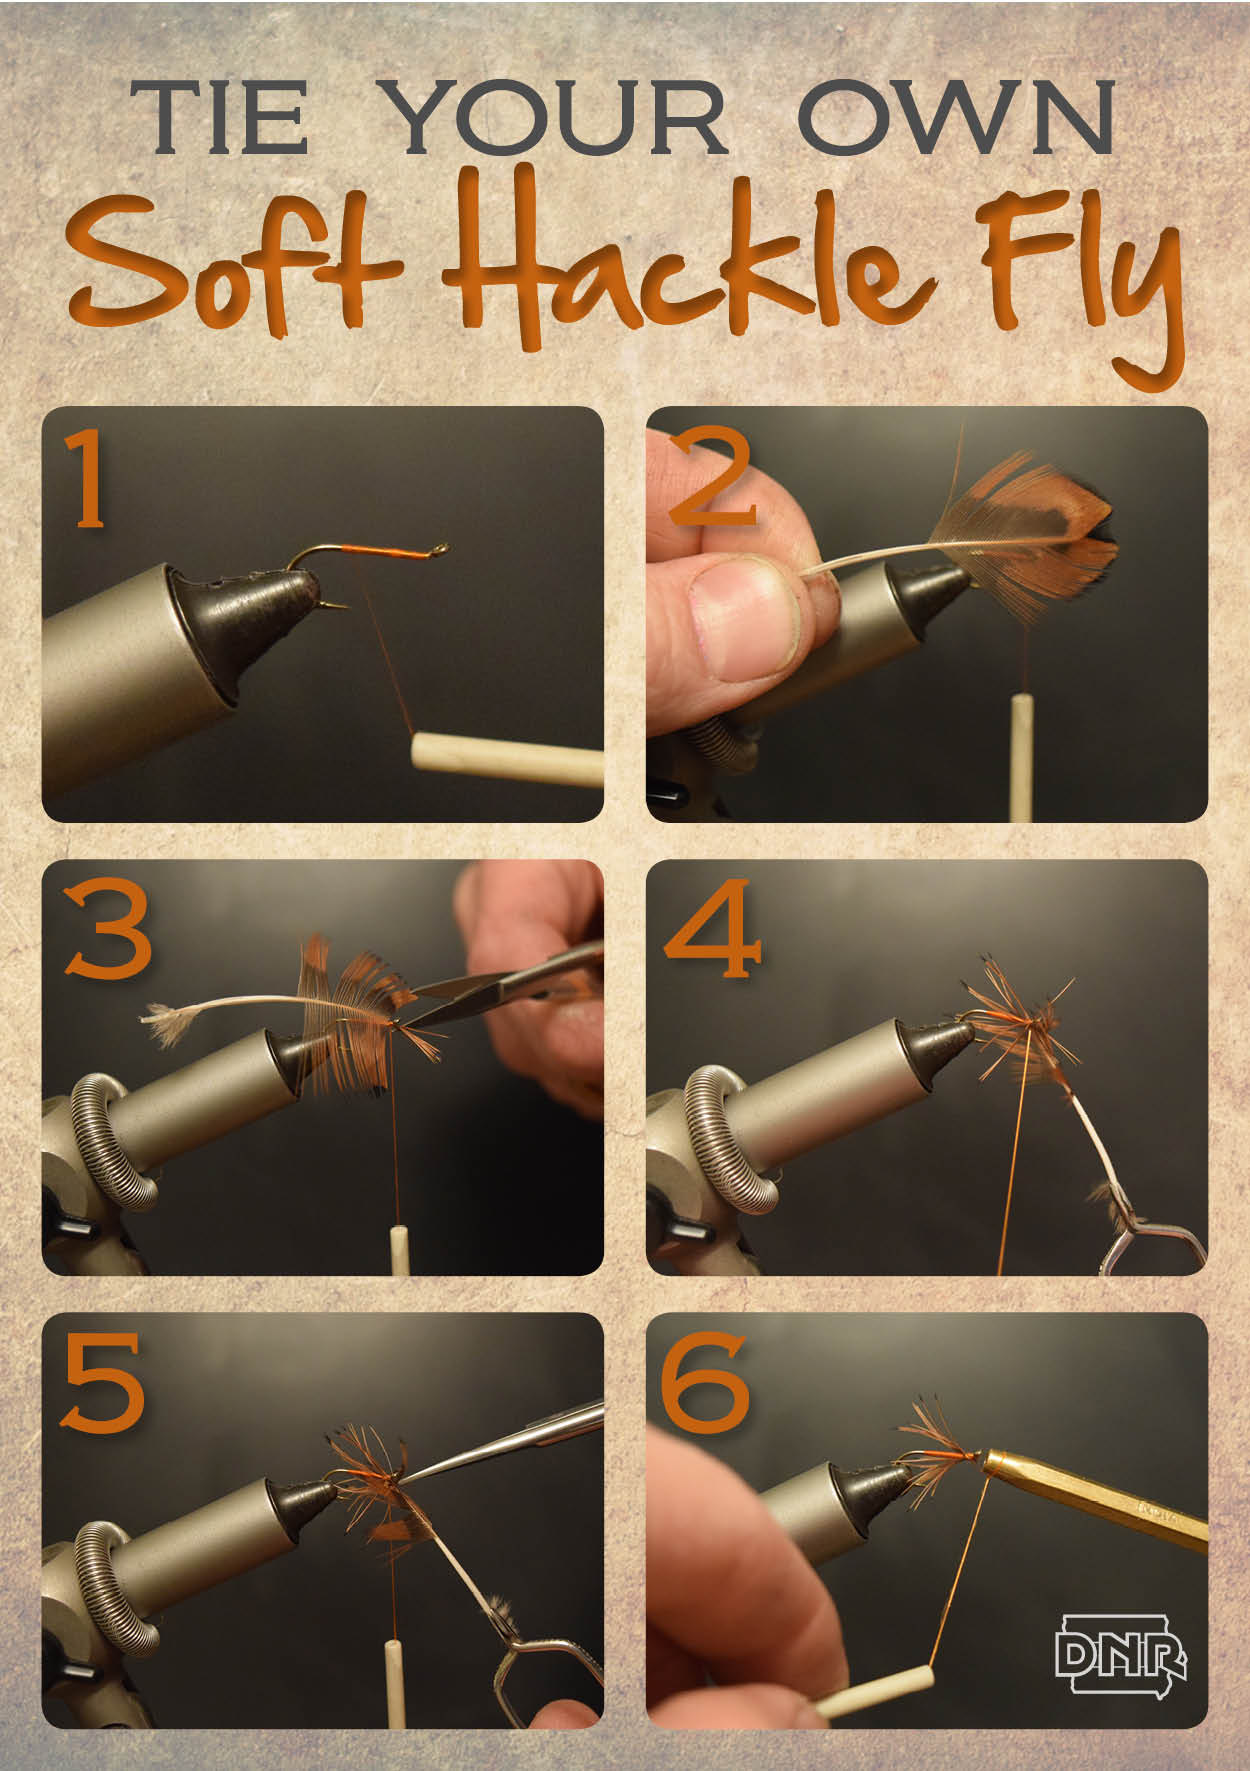 Learn how to tie your own soft hackle fishing fly from the Iowa DNR